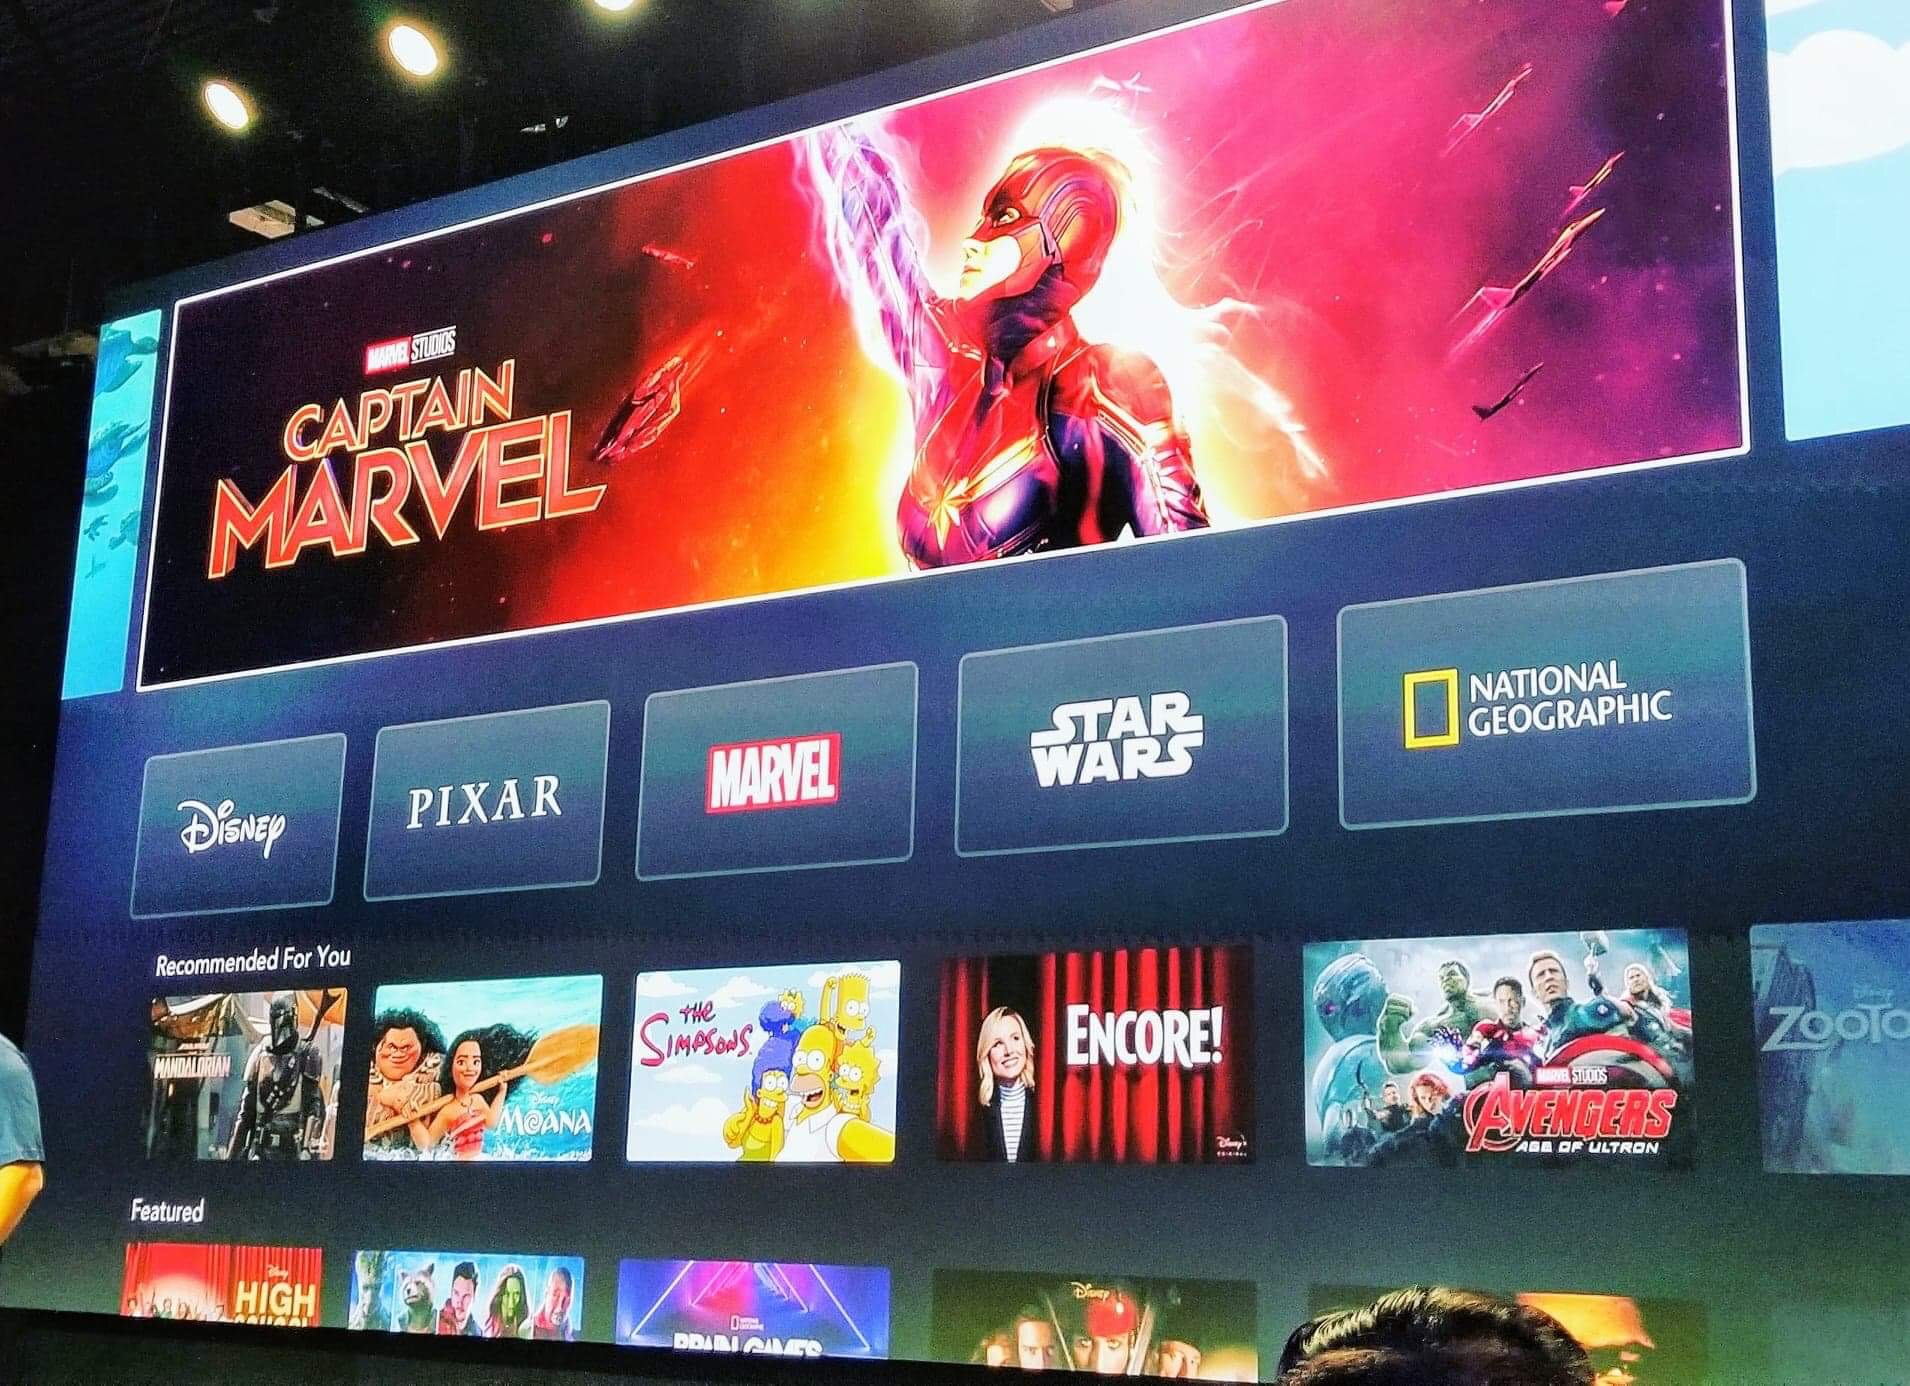 New Disney+ Promo Features Star Wars, Pixar, Marvel, and More